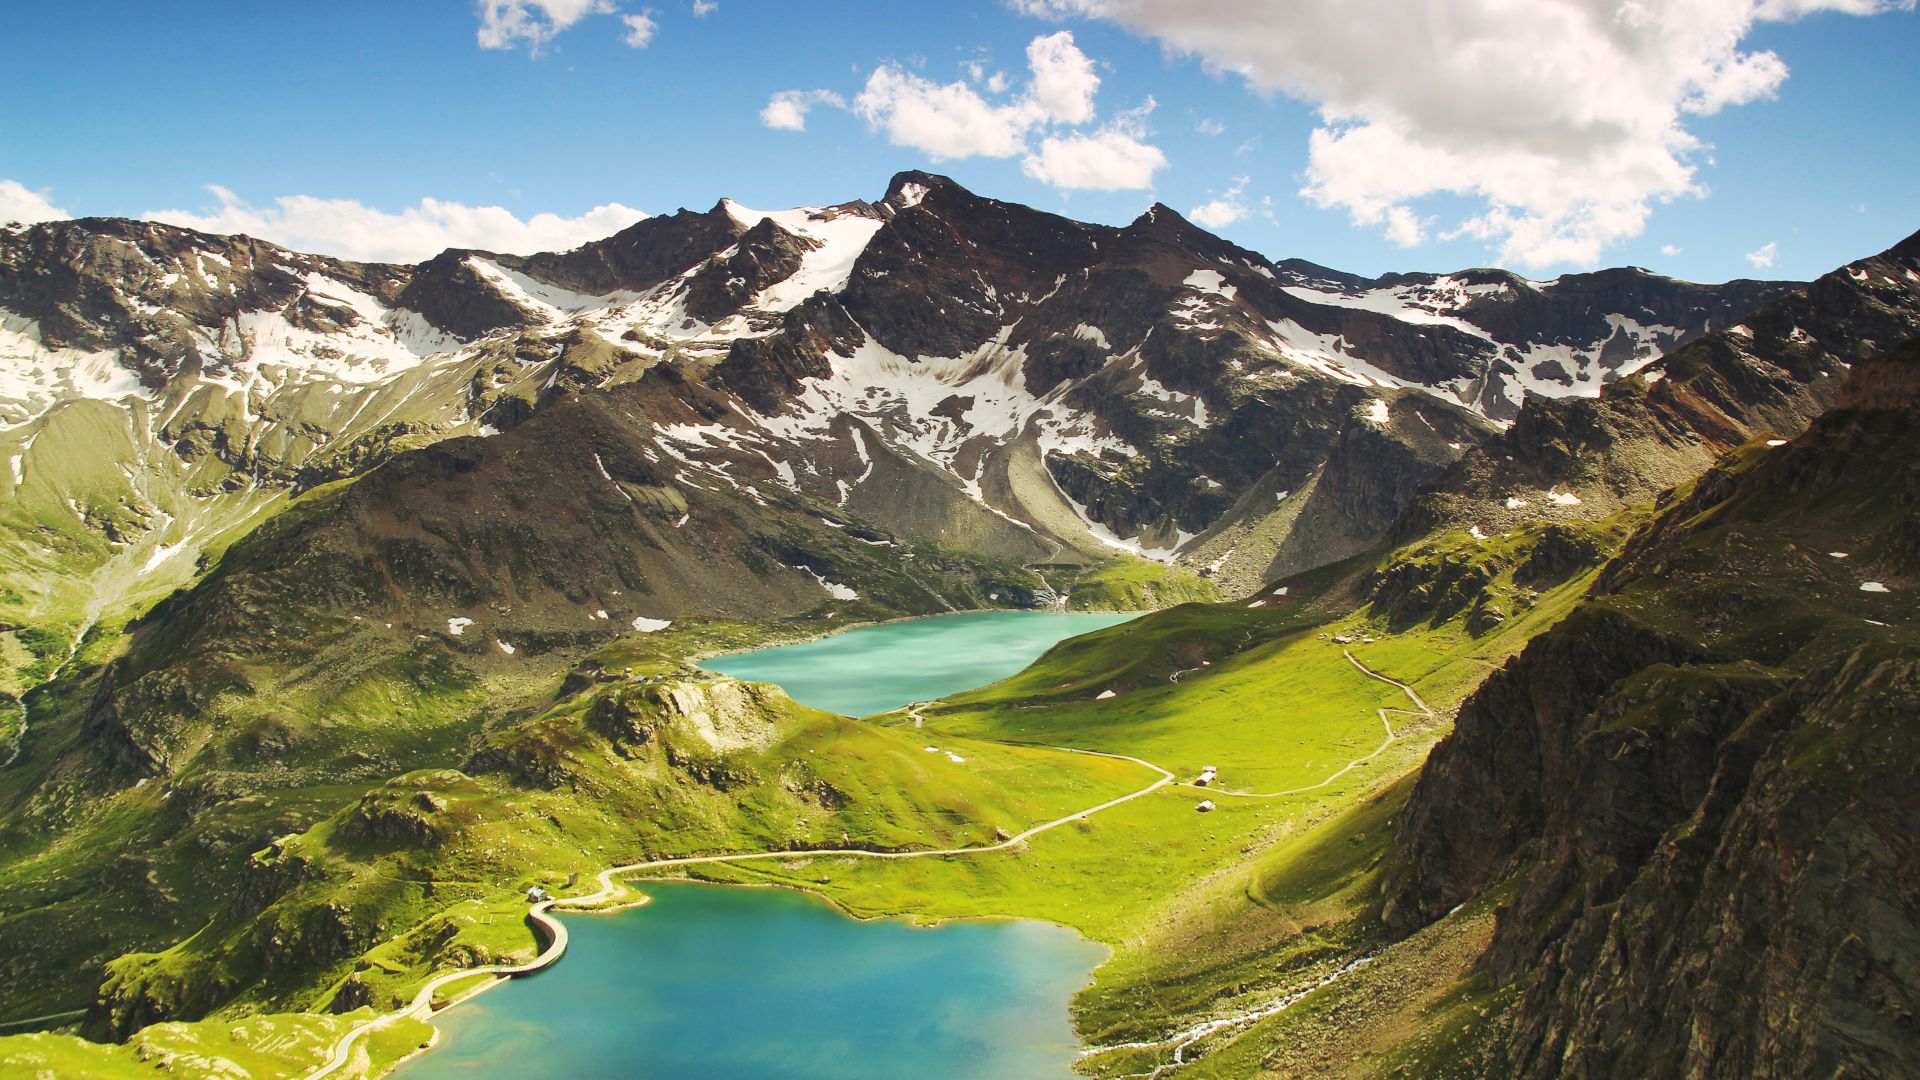 Ceresole Reale, 4k, 5k wallpaper, Italy, mountains, lake, hills. clouds (horizontal)